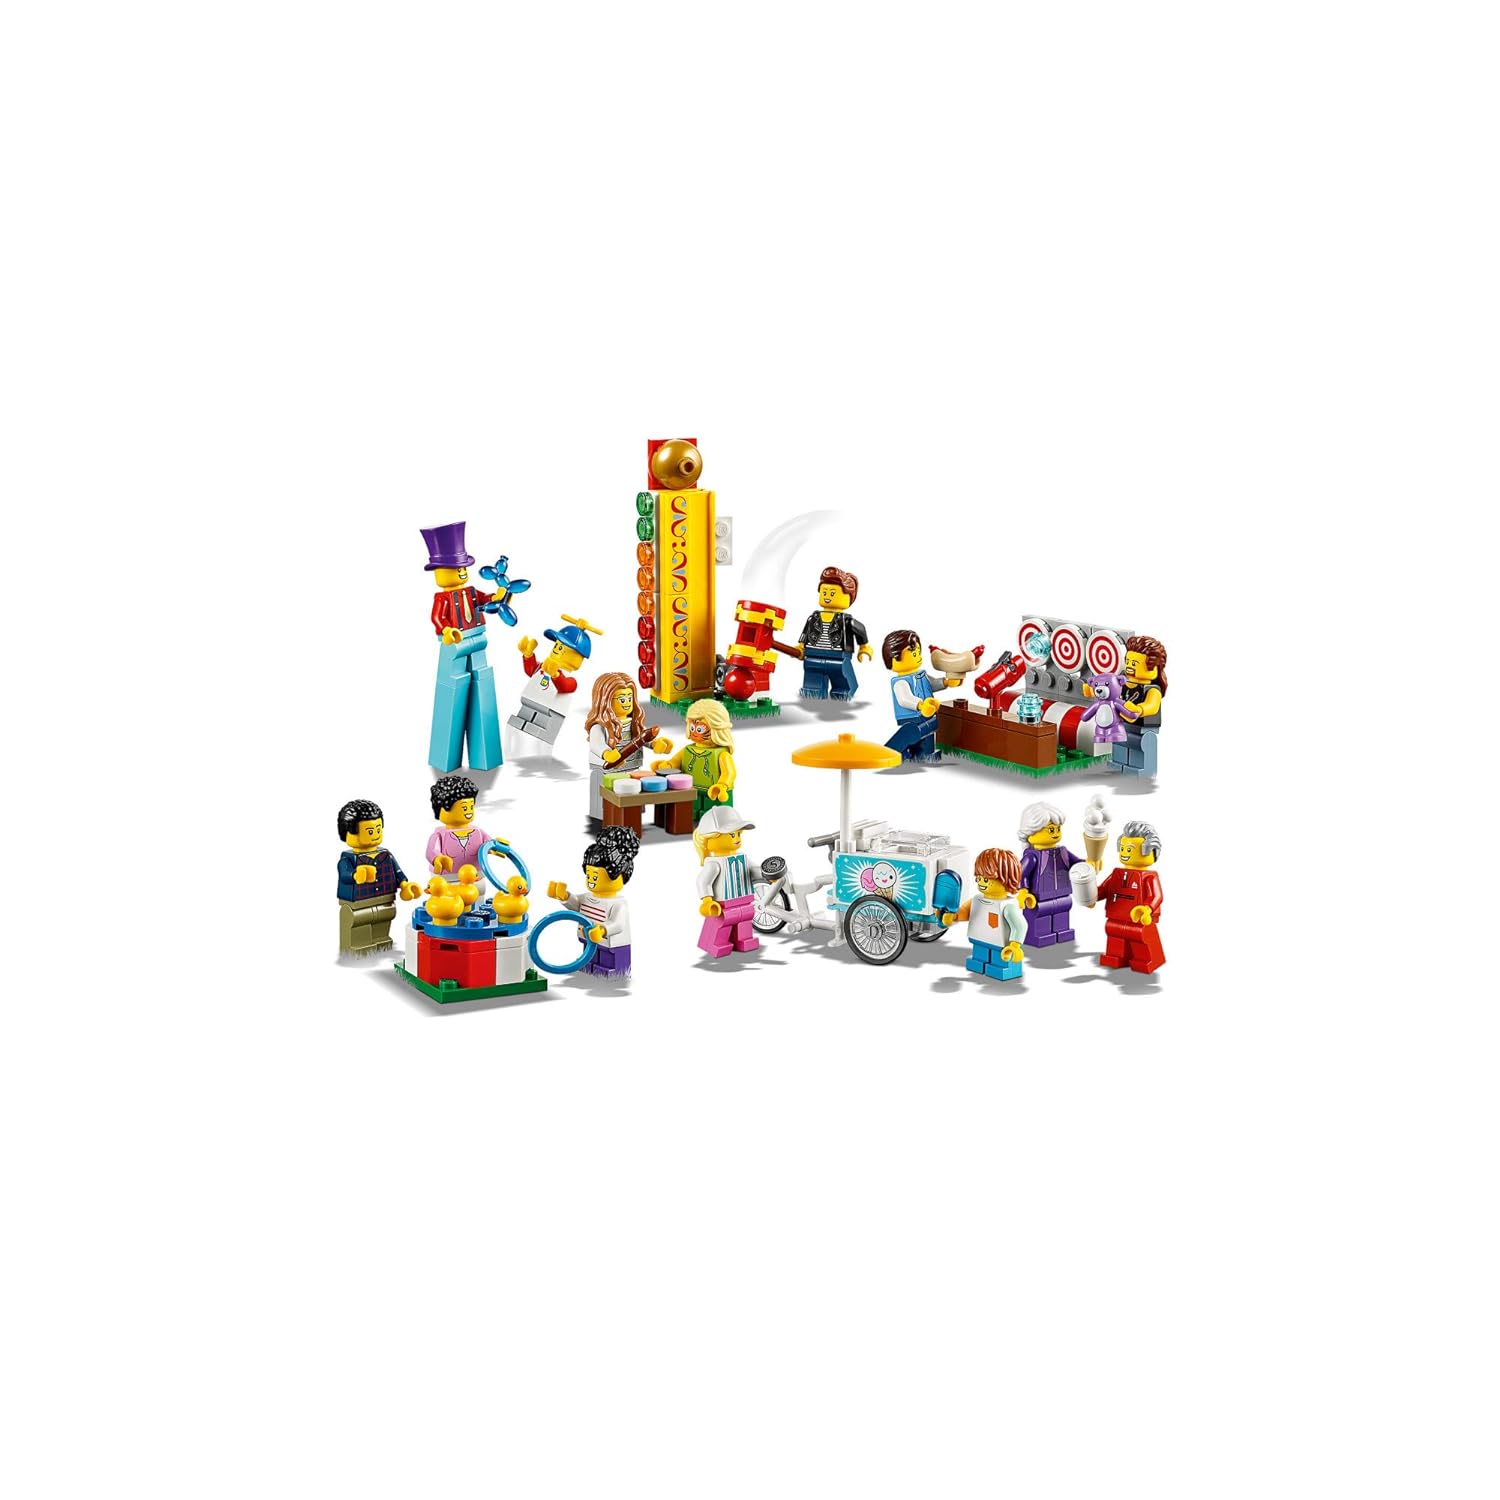 Take away according to Interruption LEGO City People Pack – Fun Fair 60234 Building Kit (183 Pieces)